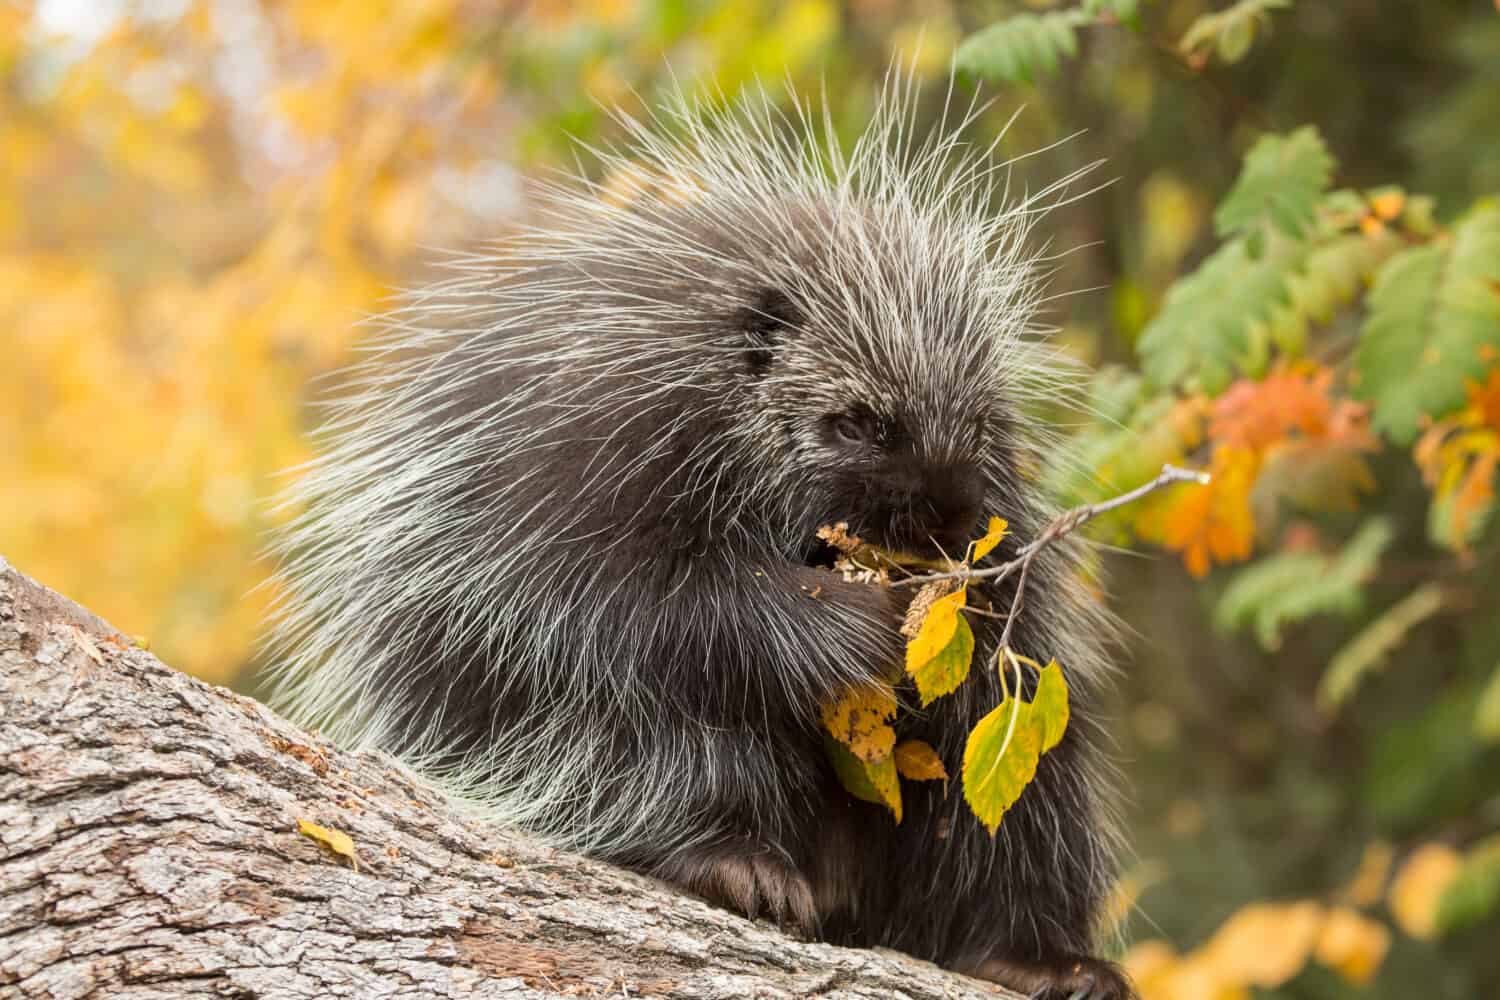 close up of a North american porcupine foraging with trees and fall foliage in the background